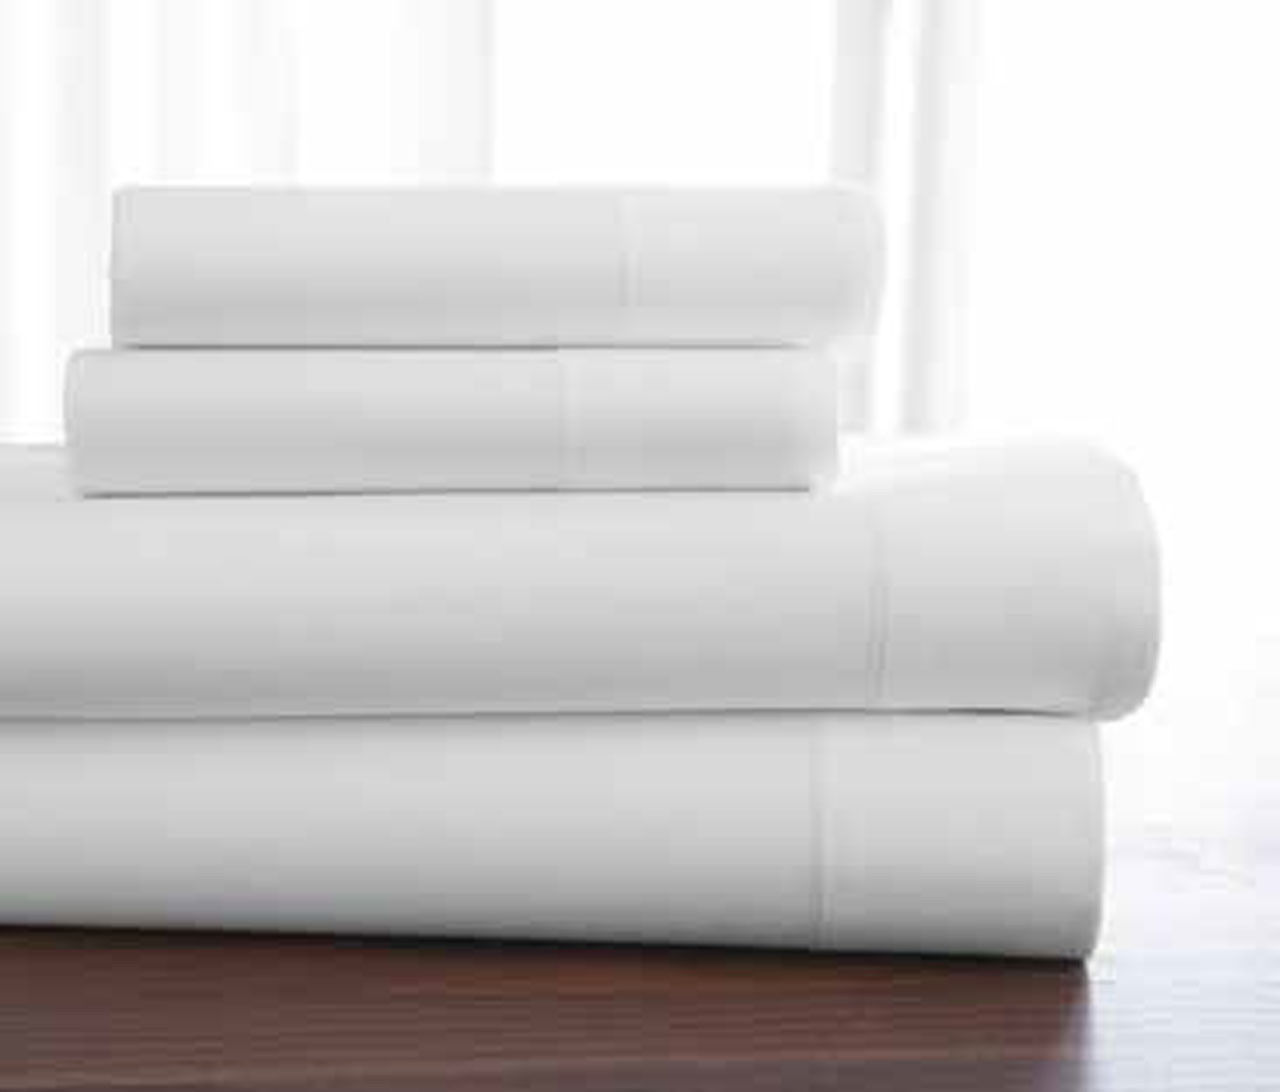 What is the Welspun T-400 Premium Hygrocotton Sheets made of?